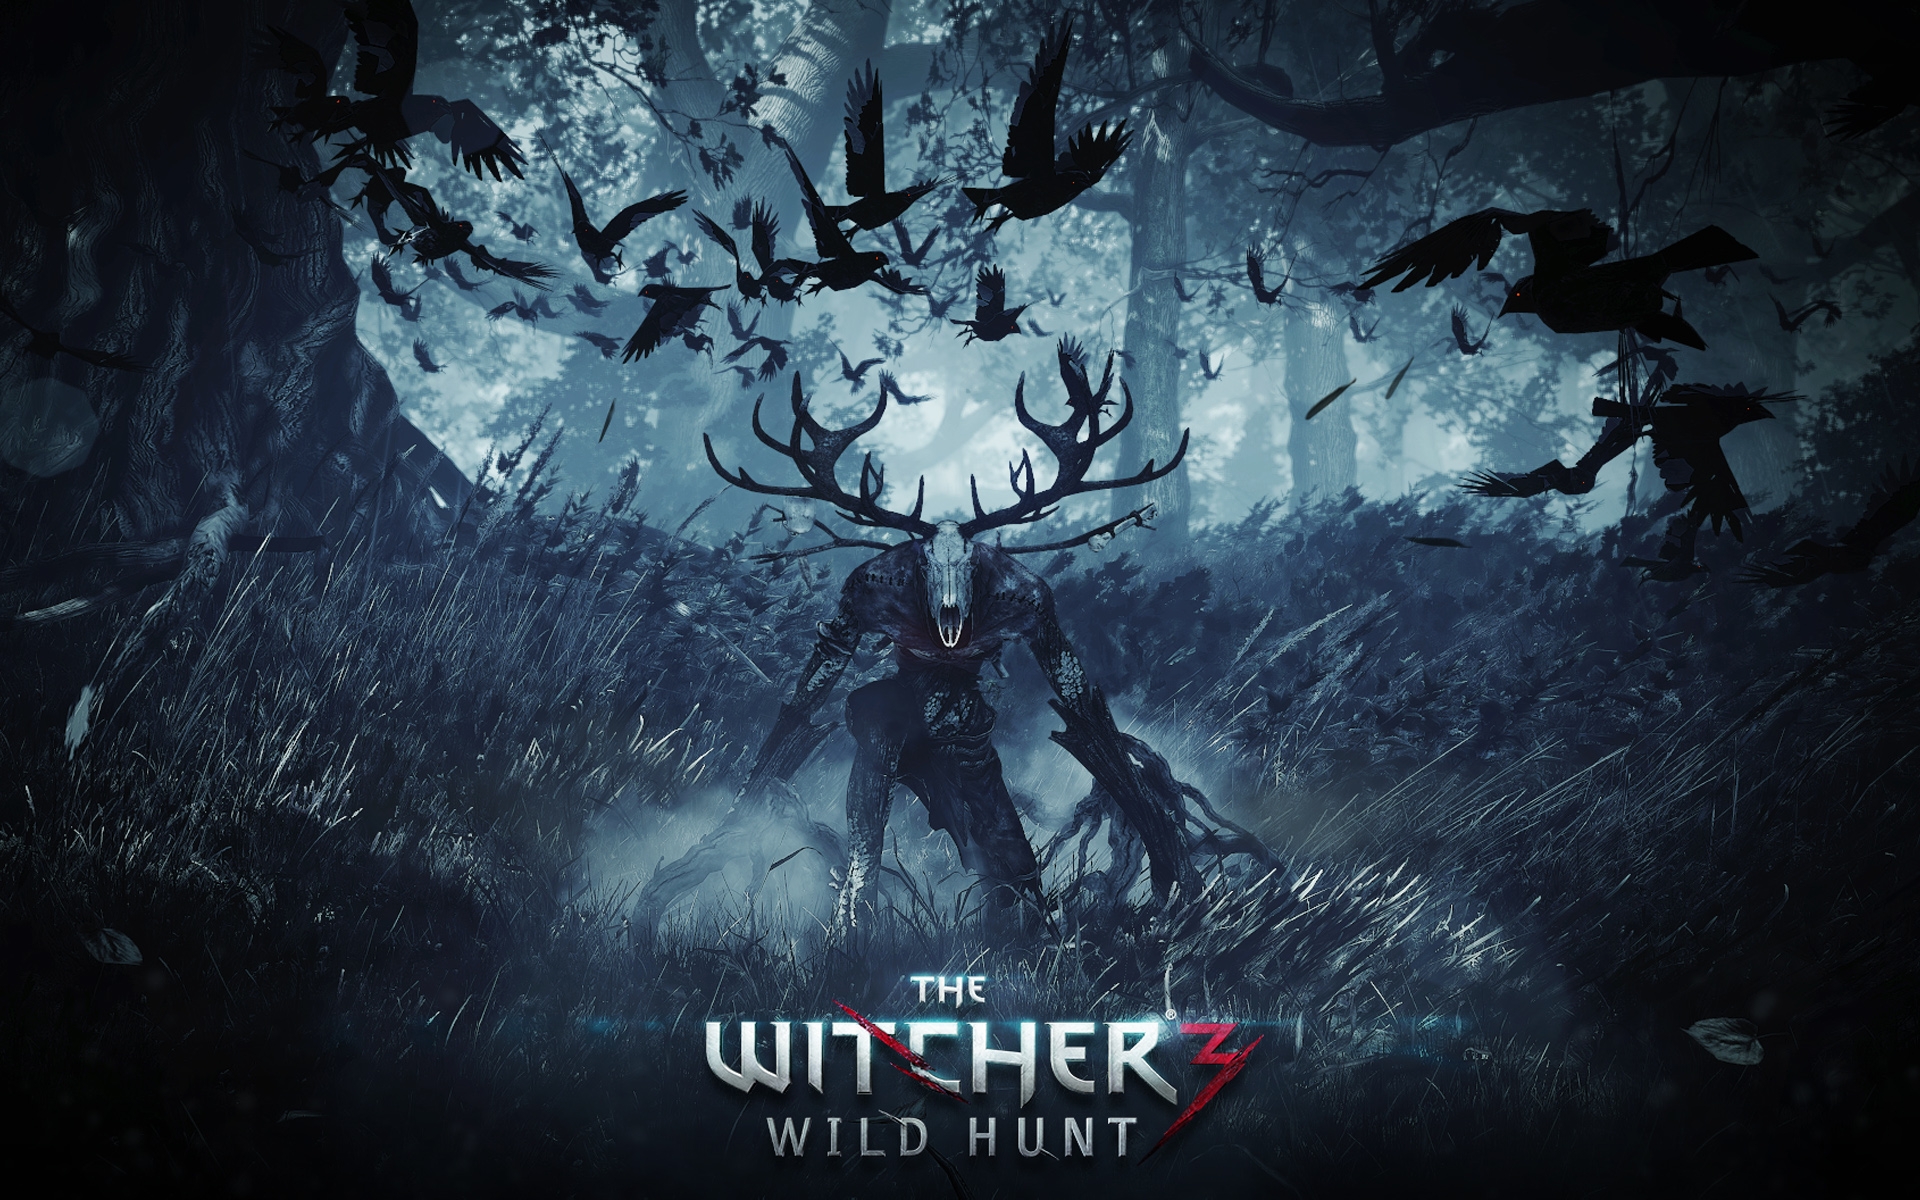 Witcher 3 Backgrounds - HD Wallpaper 